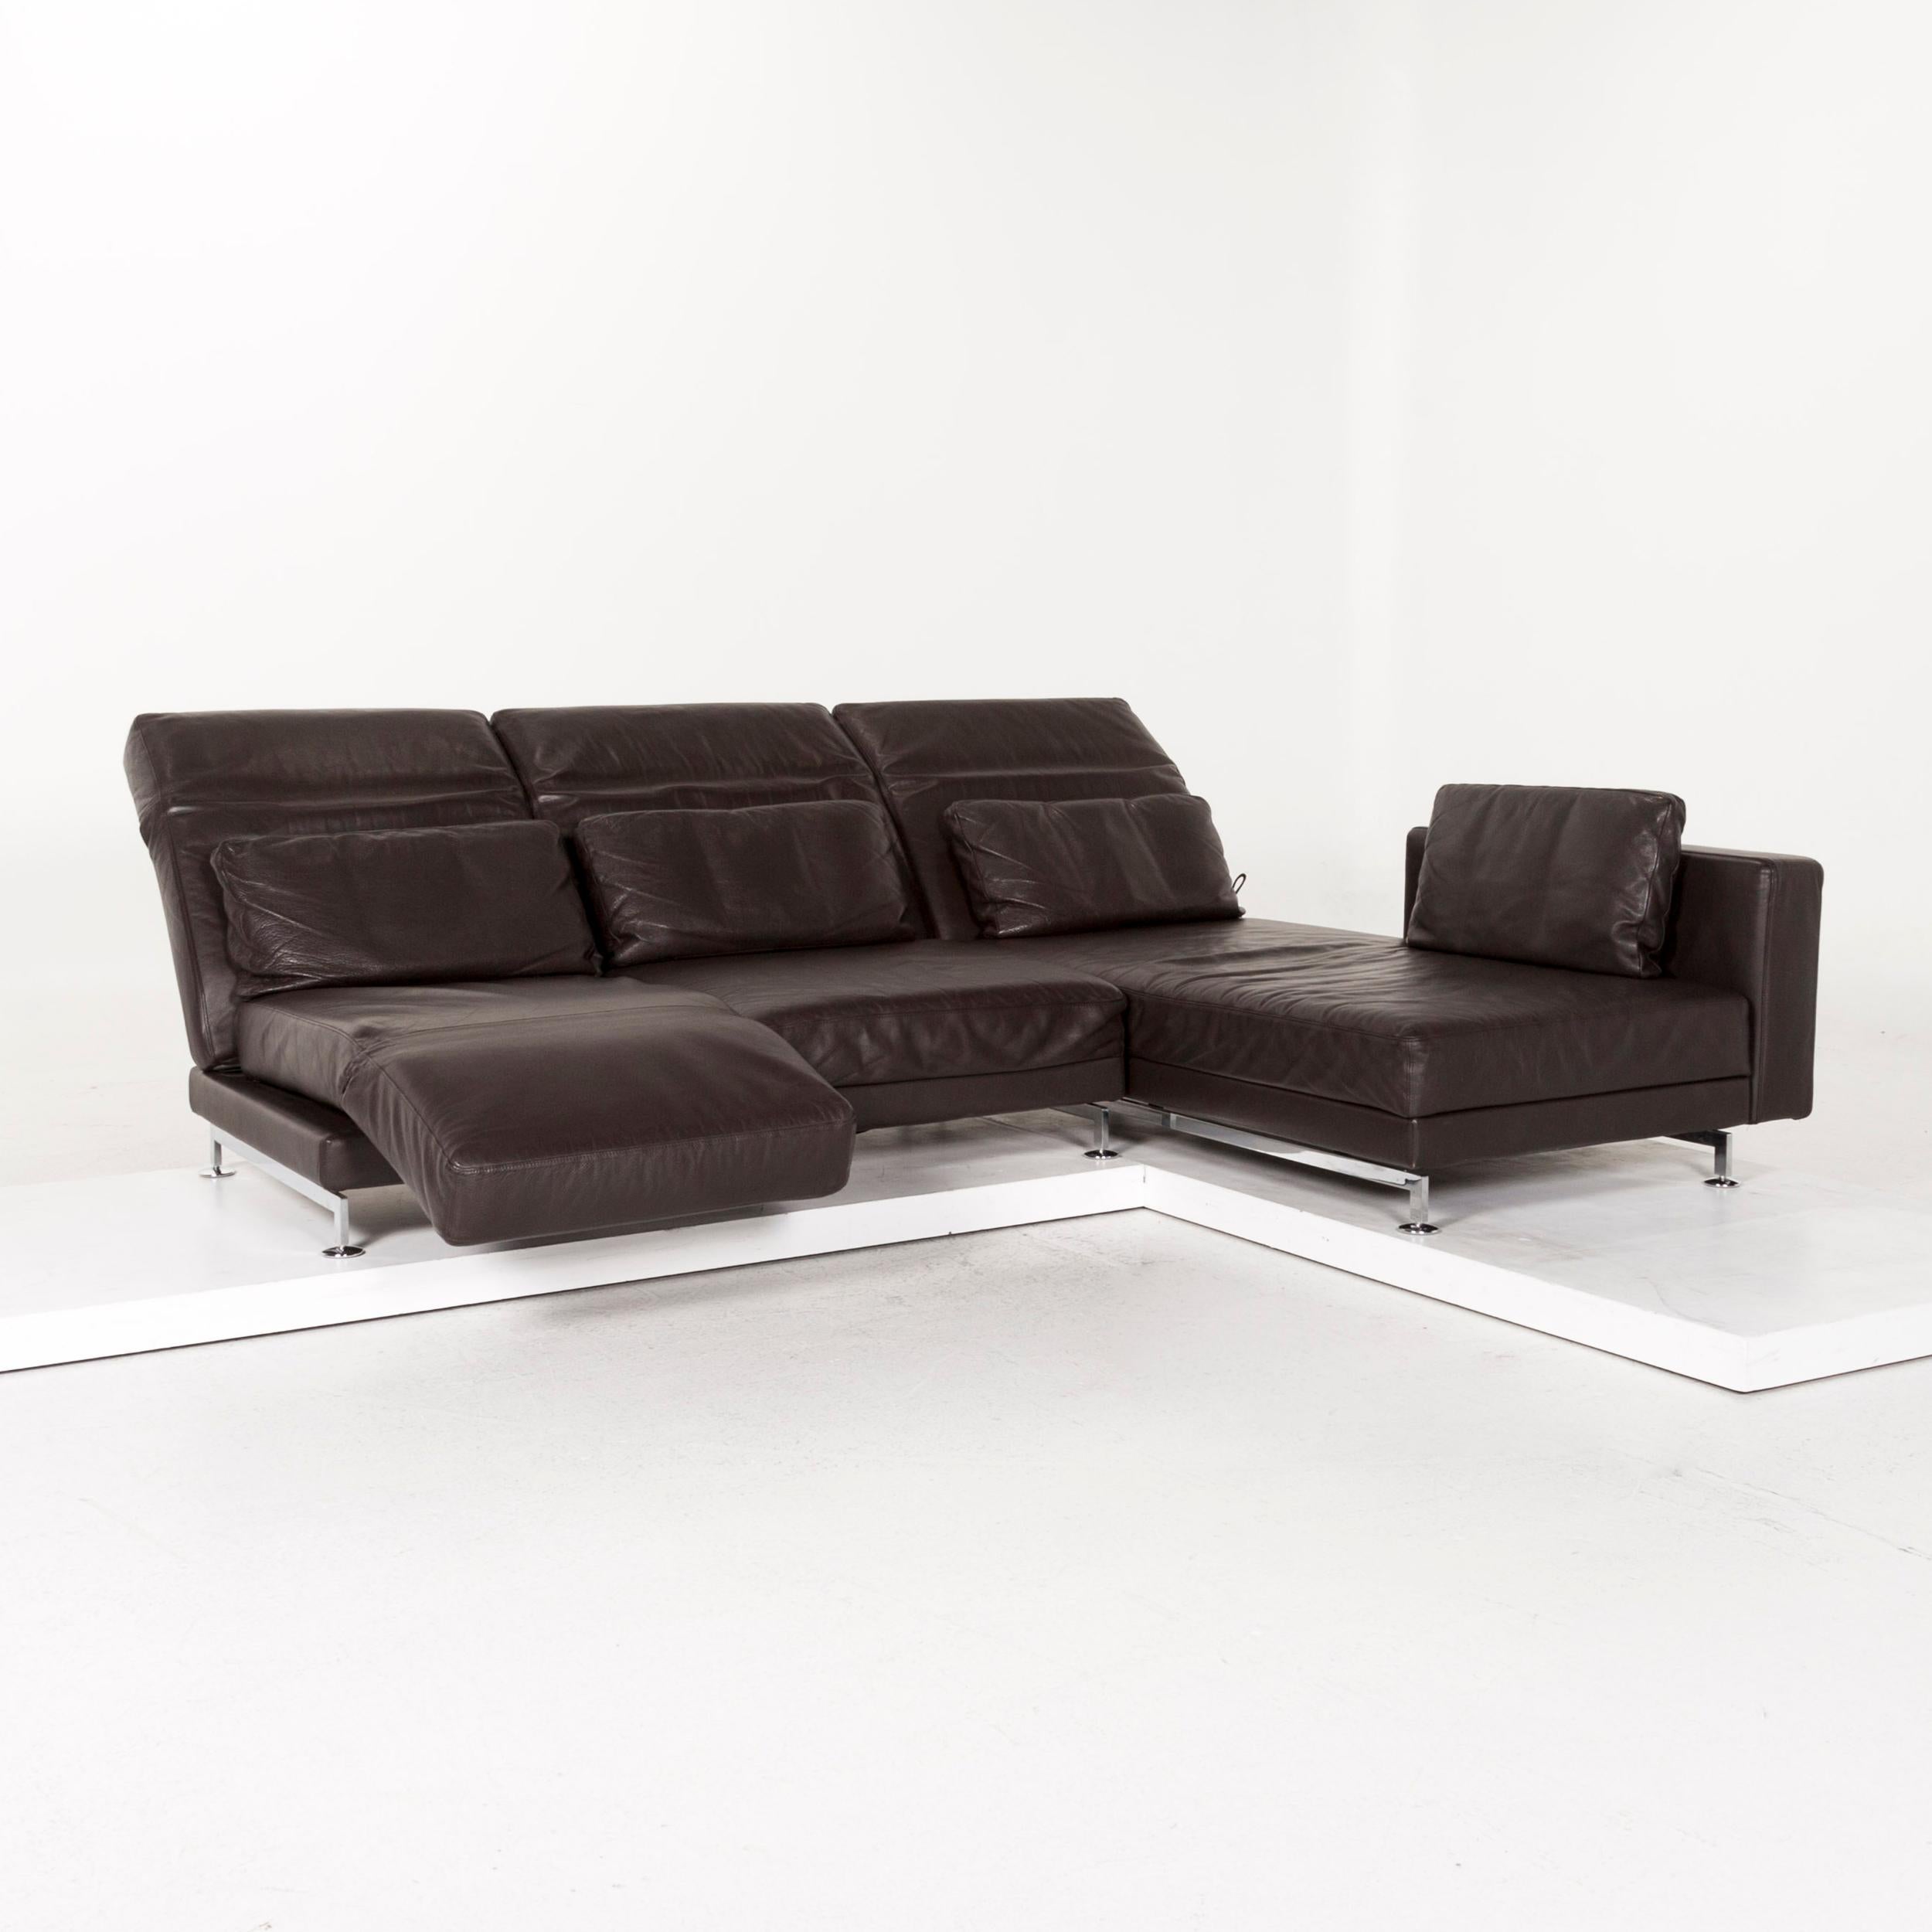 We present to you a Brühl & Sippold Moule leather corner sofa brown sofa function relax function.

 

 Product measurements in centimeters:
 

Depth 94
Width 271
Height 104
Seat height 41
Rest height 62
Seat depth 65
Seat width